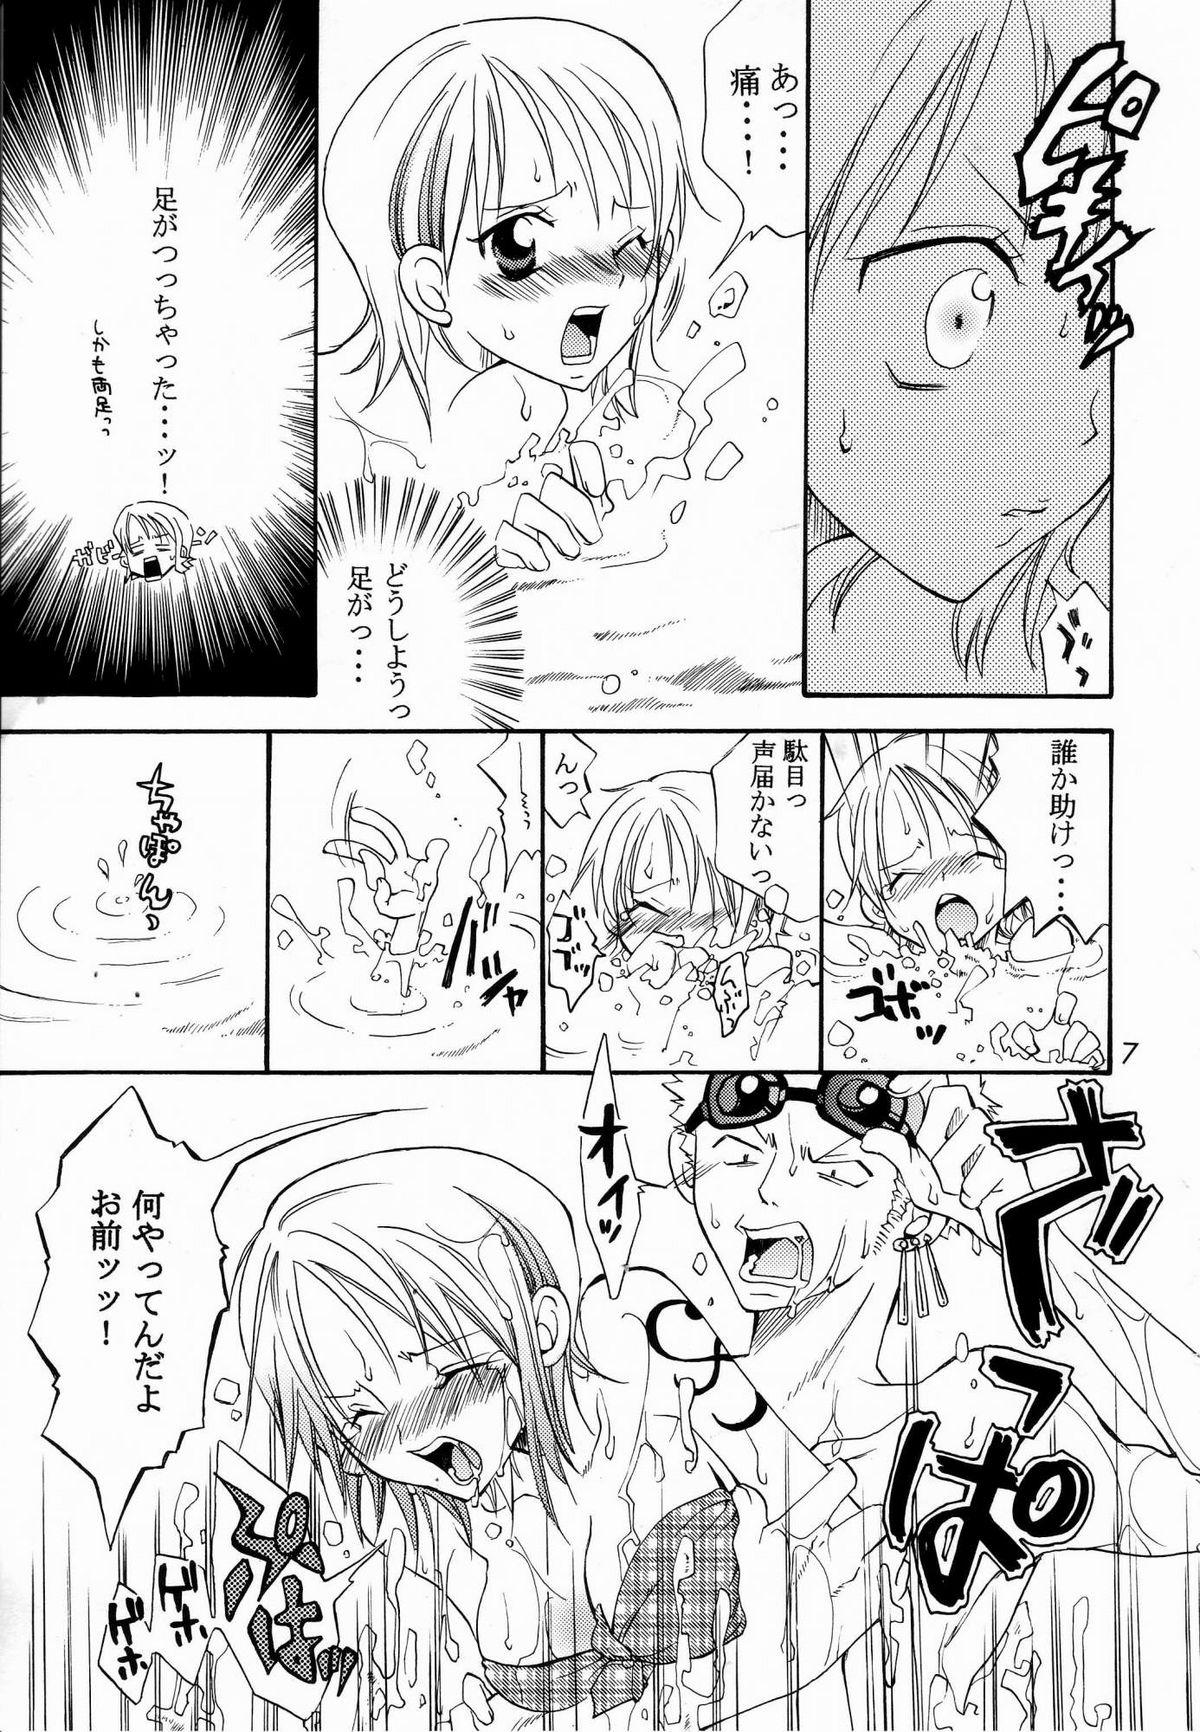 Best Blowjob Ever Shiawase Punch! 5 - One piece Blows - Page 6